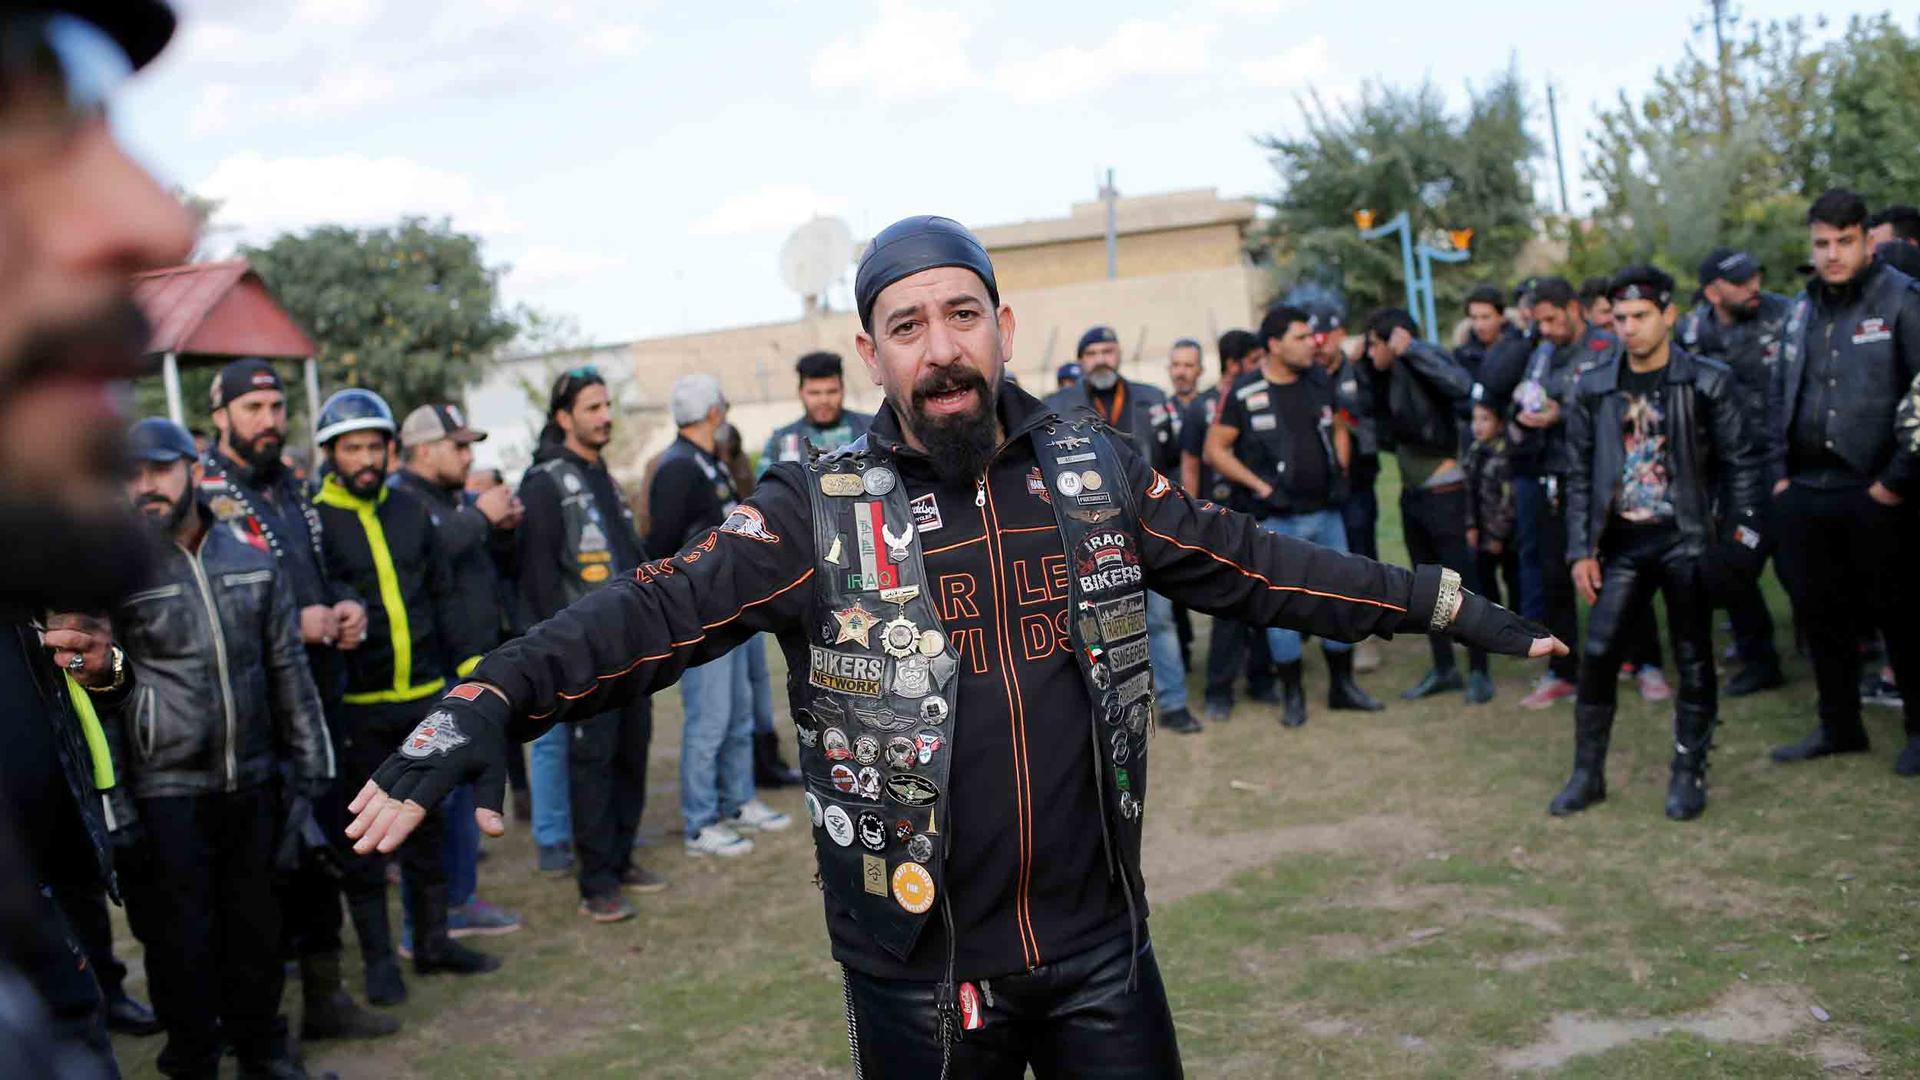 A man wearing all leather is surrounded by about three dozen others wearing similar clothing.